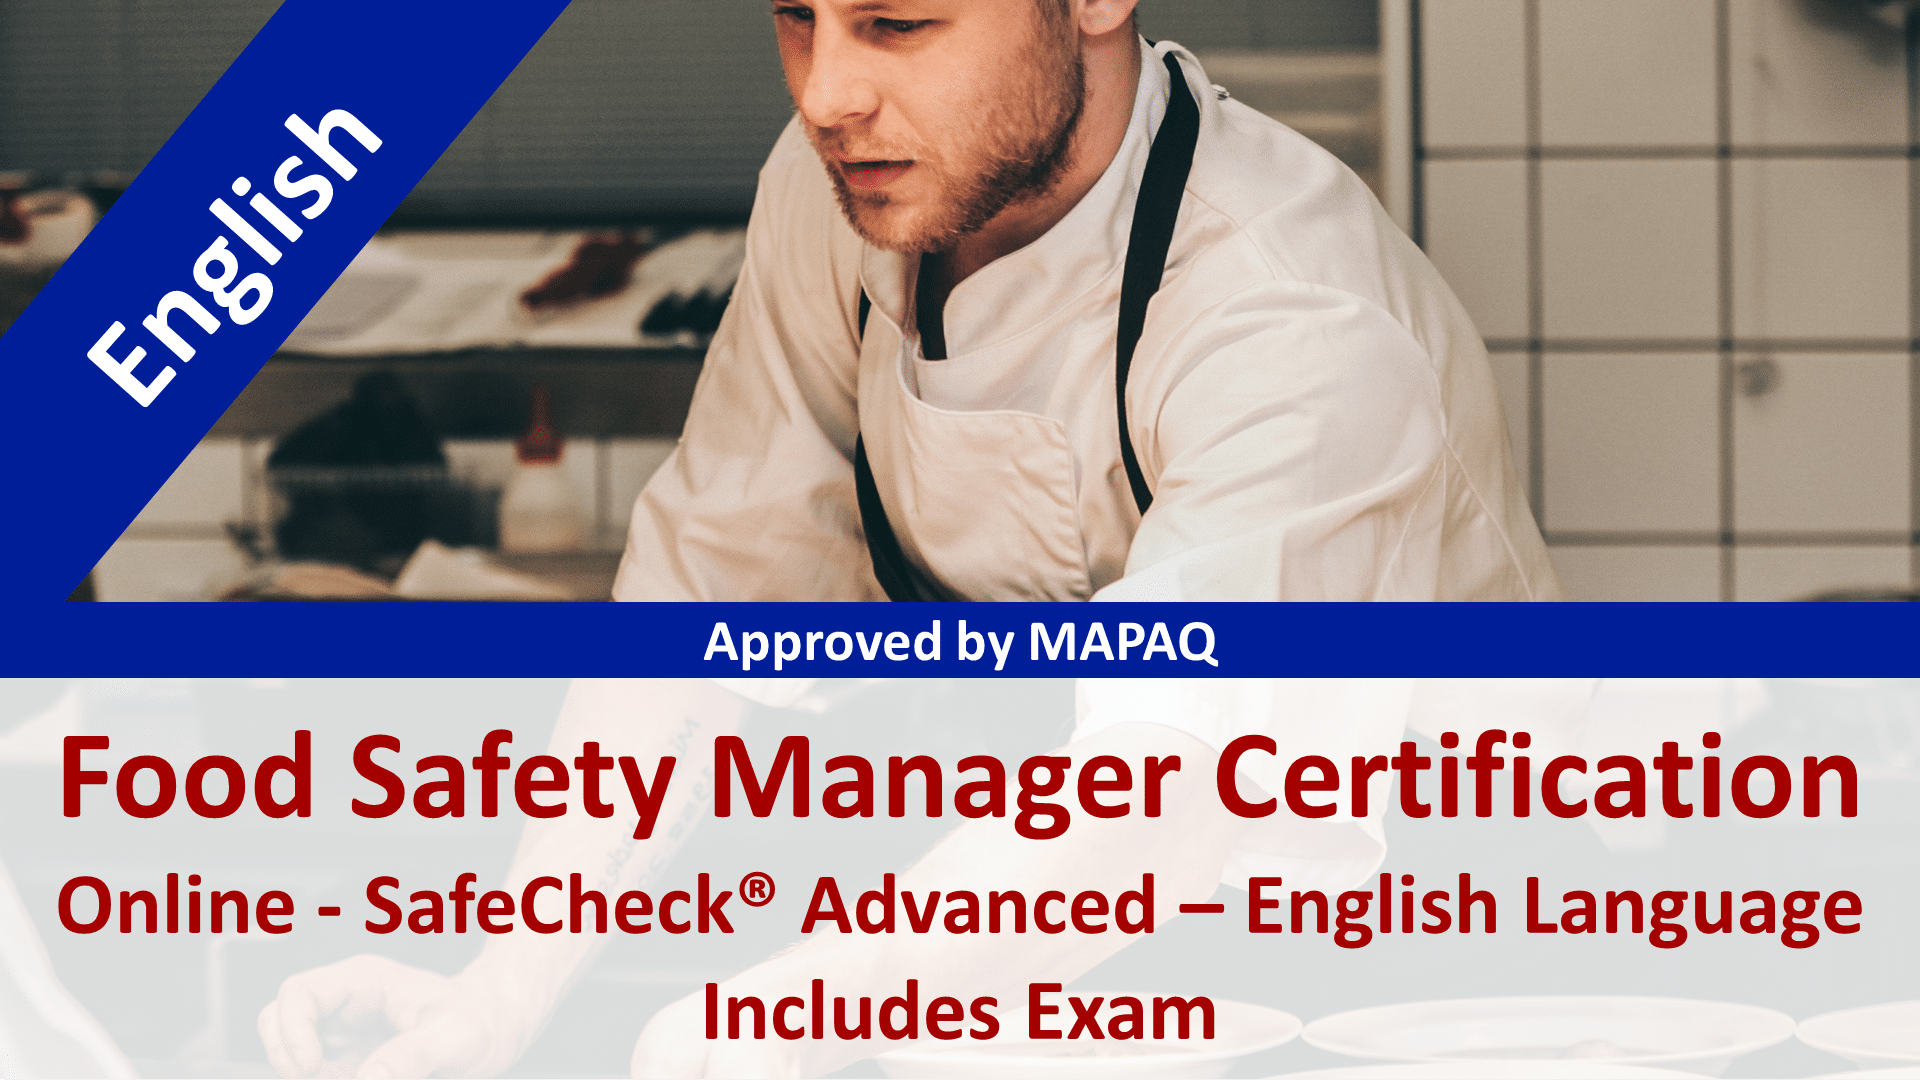 MAPAQ - Food Safety Manager Certification